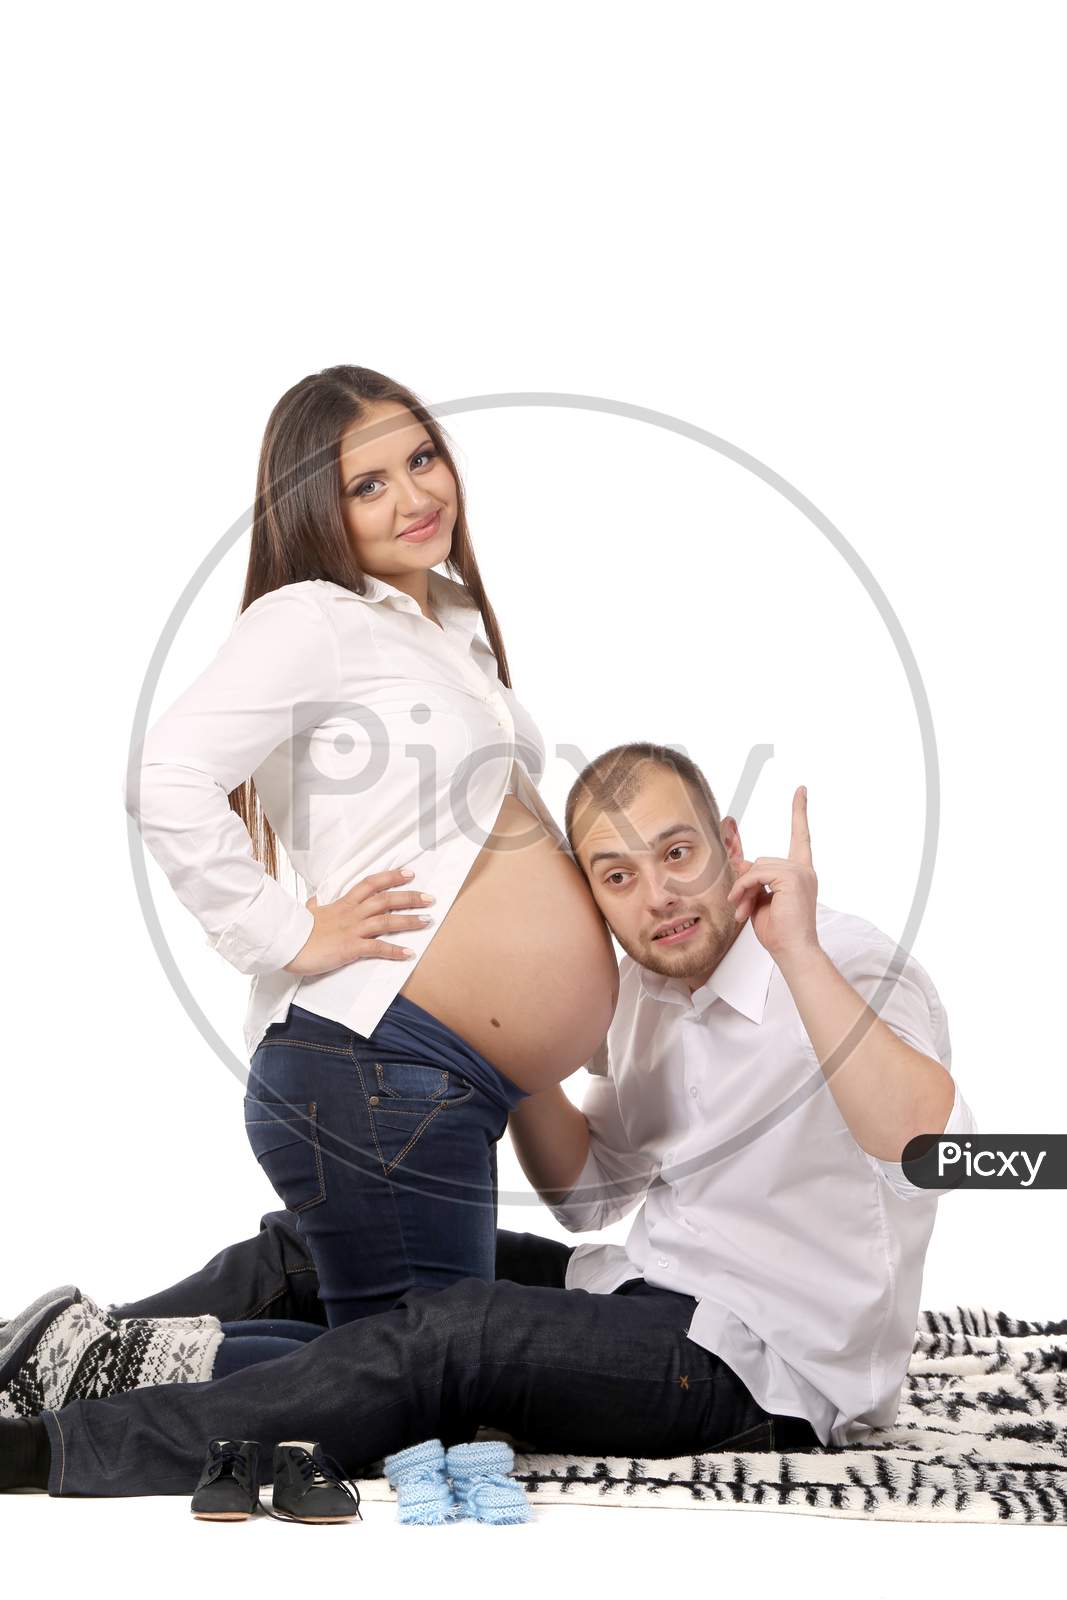 Young Couple Expecting Baby. Isolated On A White Background.